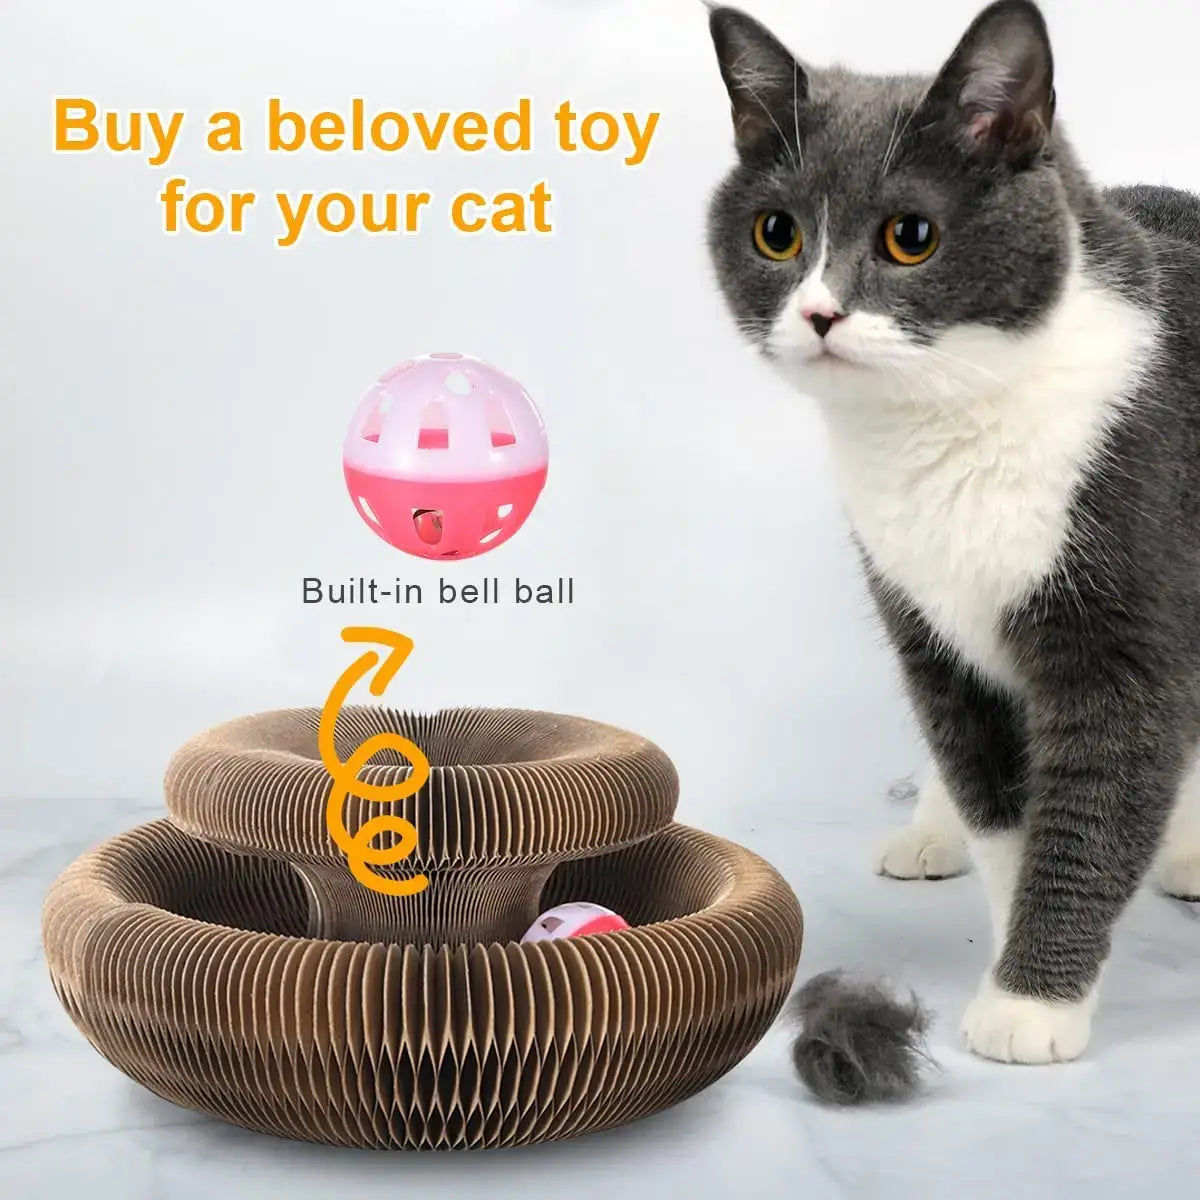 Magic Cat Scratch Board & Toy - Grind Claws & PlayDurable Magic Organ Cat Toy with corrugated scratcher & ball for endless fun. Keeps claws sharp & offers relaxation. Perfect for all cats.£2.9